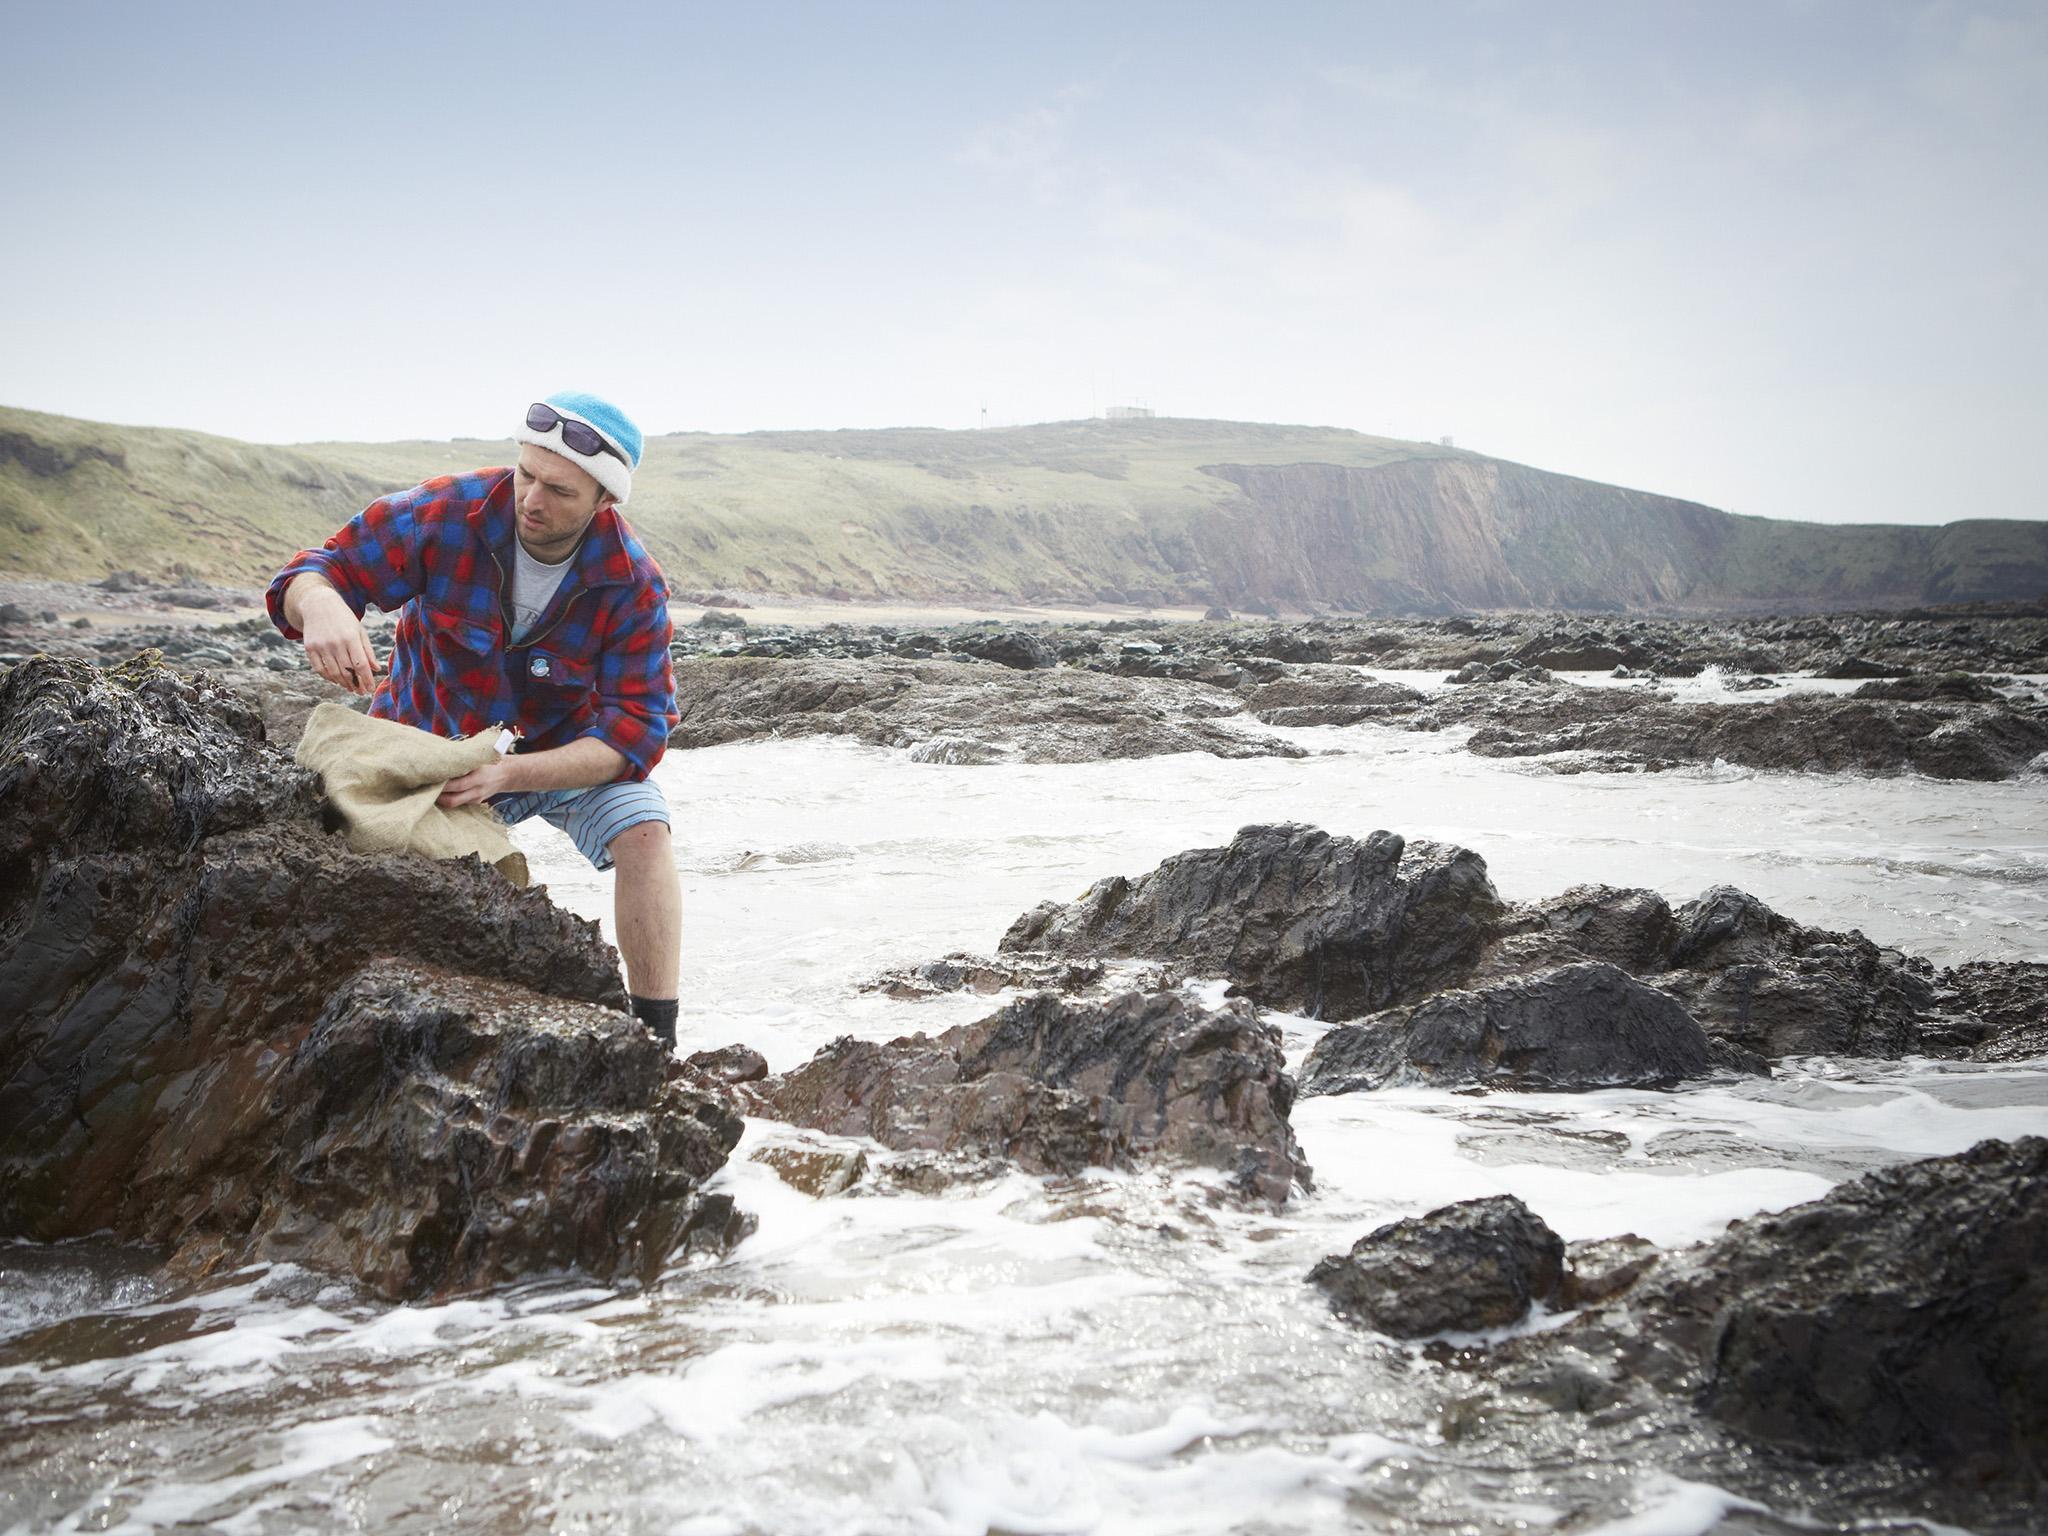 Jonathan Williams gave up his day job and launched a street-food business with seaweed as the main attraction